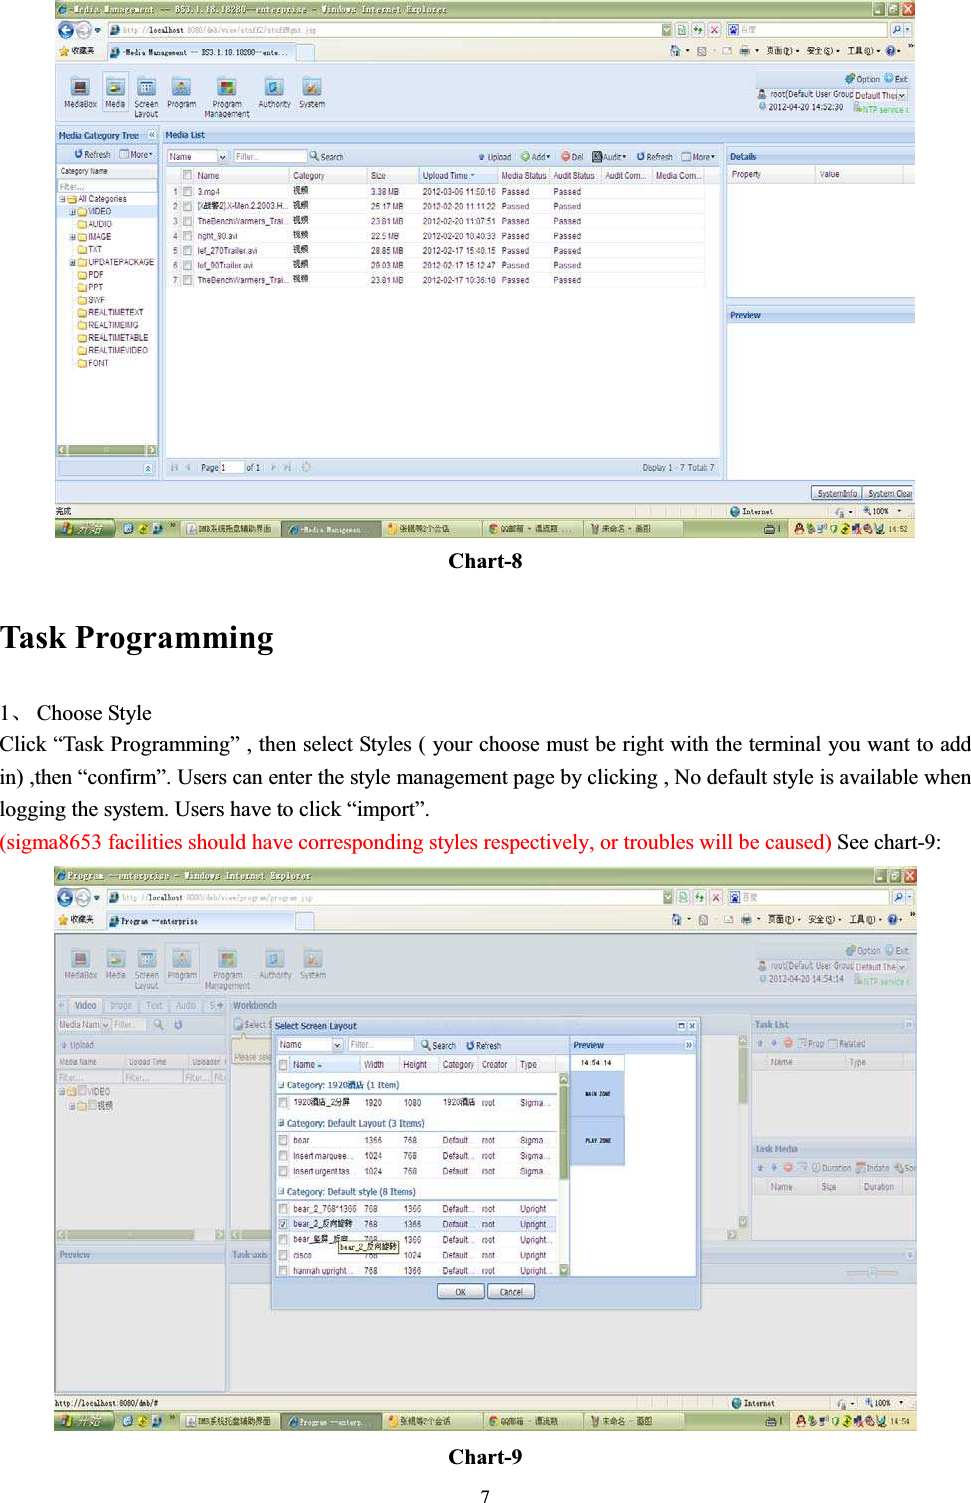 7Chart-8Task Programming1ǃChoose StyleClick “Task Programming” , then select Styles ( your choose must be right with the terminal you want to add in) ,then “confirm”. Users can enter the style management page by clicking , No default style is available when logging the system. Users have to click “import”.(sigma8653 facilities should have corresponding styles respectively, or troubles will be caused) See chart-9:Chart-9